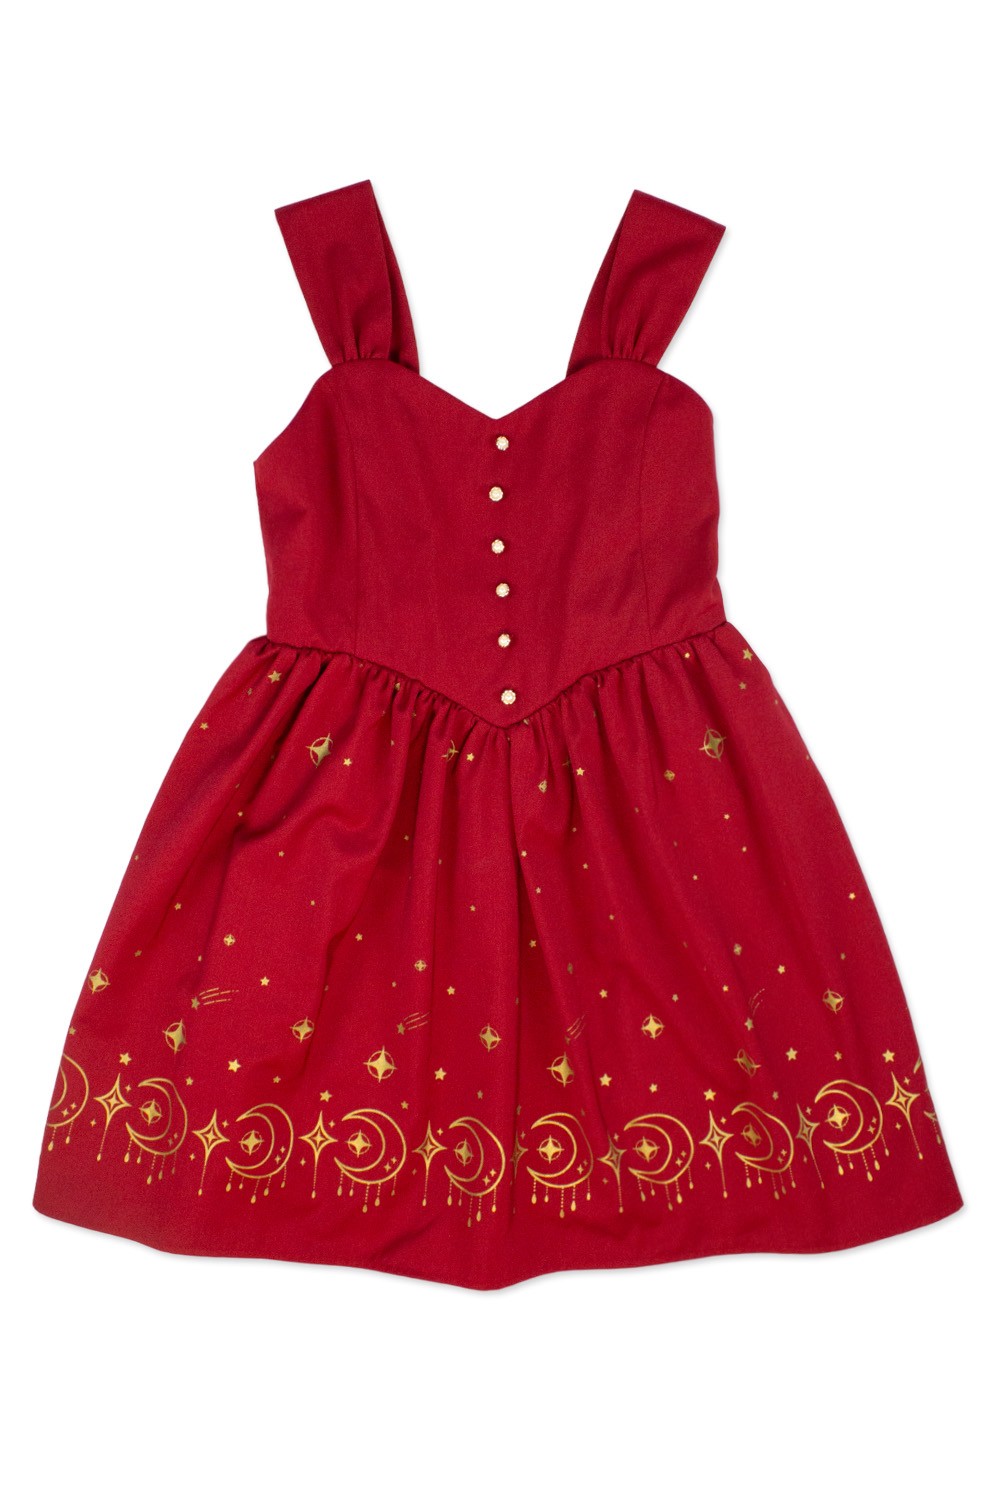 [2nd Hand] Red JSK Dress with Golden Print To Alice